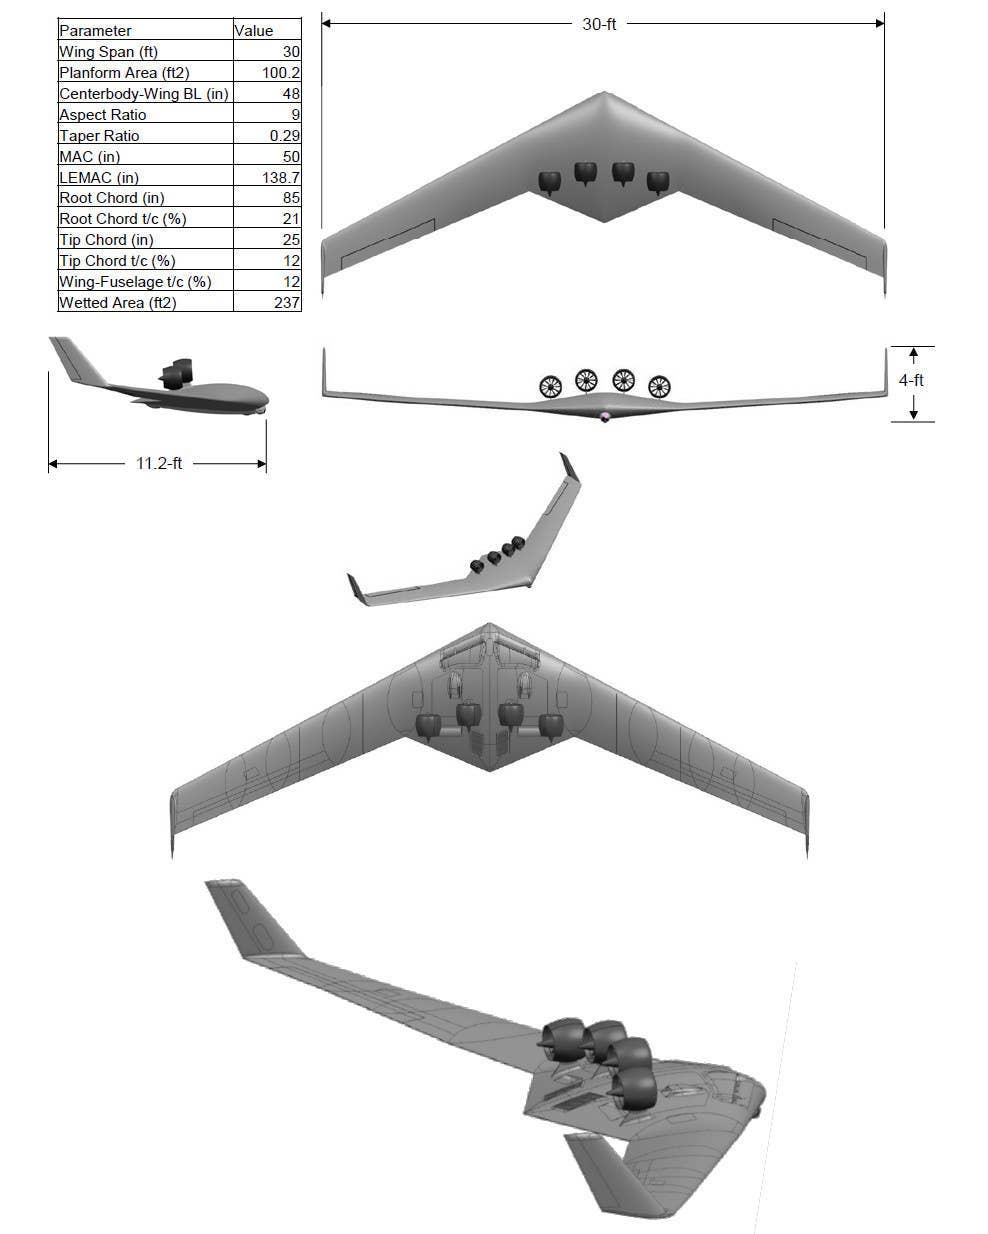 A rendering of the <a href="https://www.twz.com/32807/exclusive-unmasking-northrop-grummans-xrq-72a-great-horned-owl-spy-drone">XRQ-72A</a> ultra-quiet, high-efficiency reconnaissance drone, along with various dimensional and other details. The design may have had the option of battery-only flight.&nbsp;<em>USAF via FOIA</em>